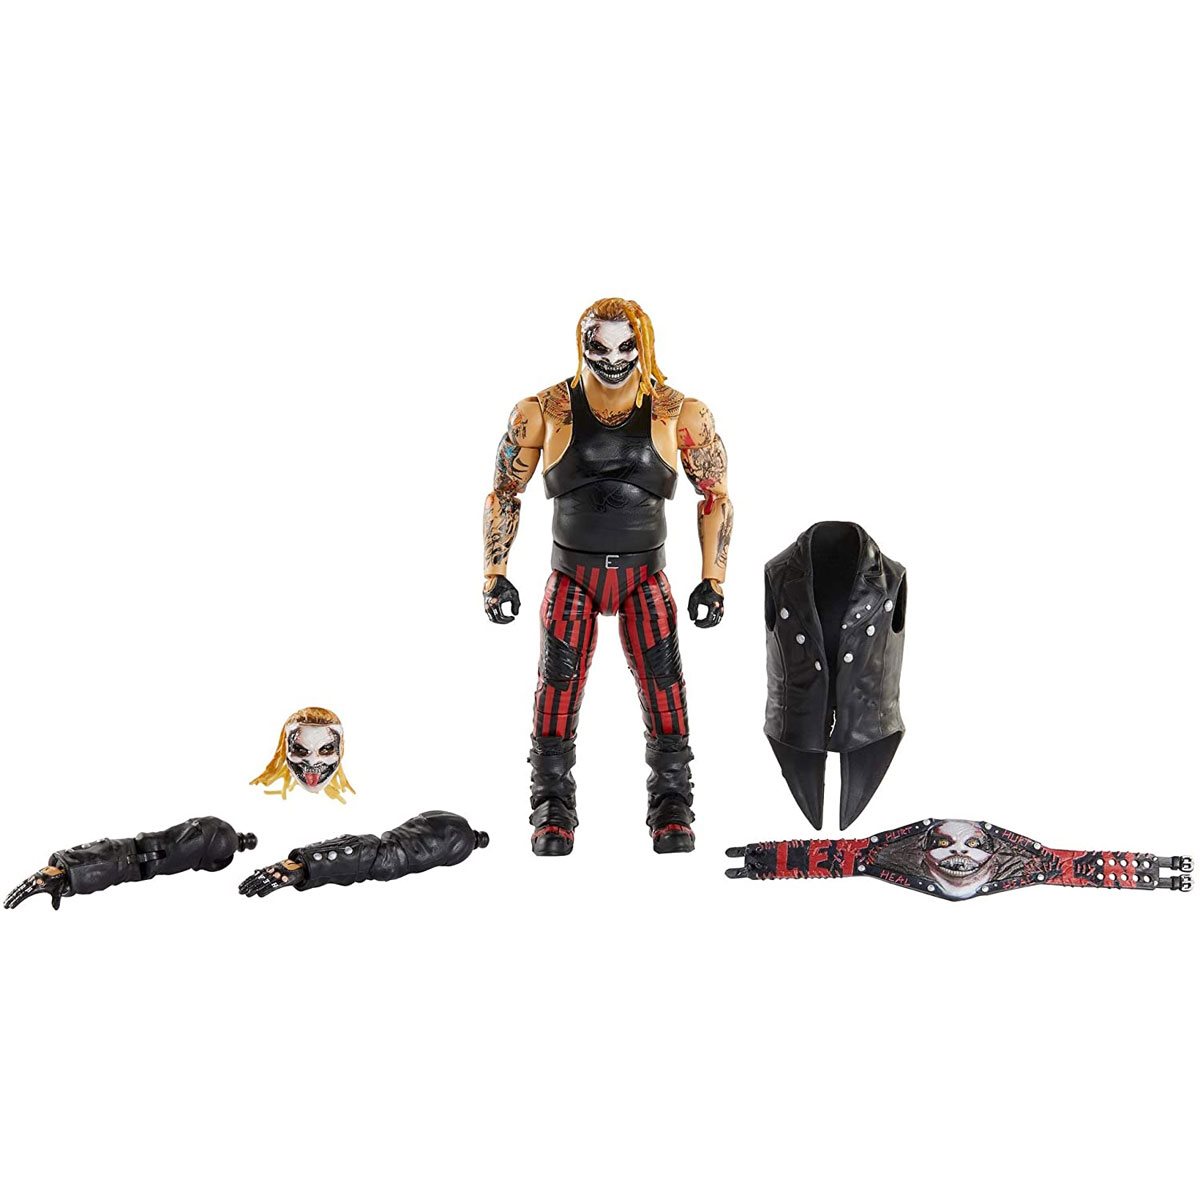 Wwe Ultimate Edition Wave 7 The Fiend Bray Wyatt Action Figure